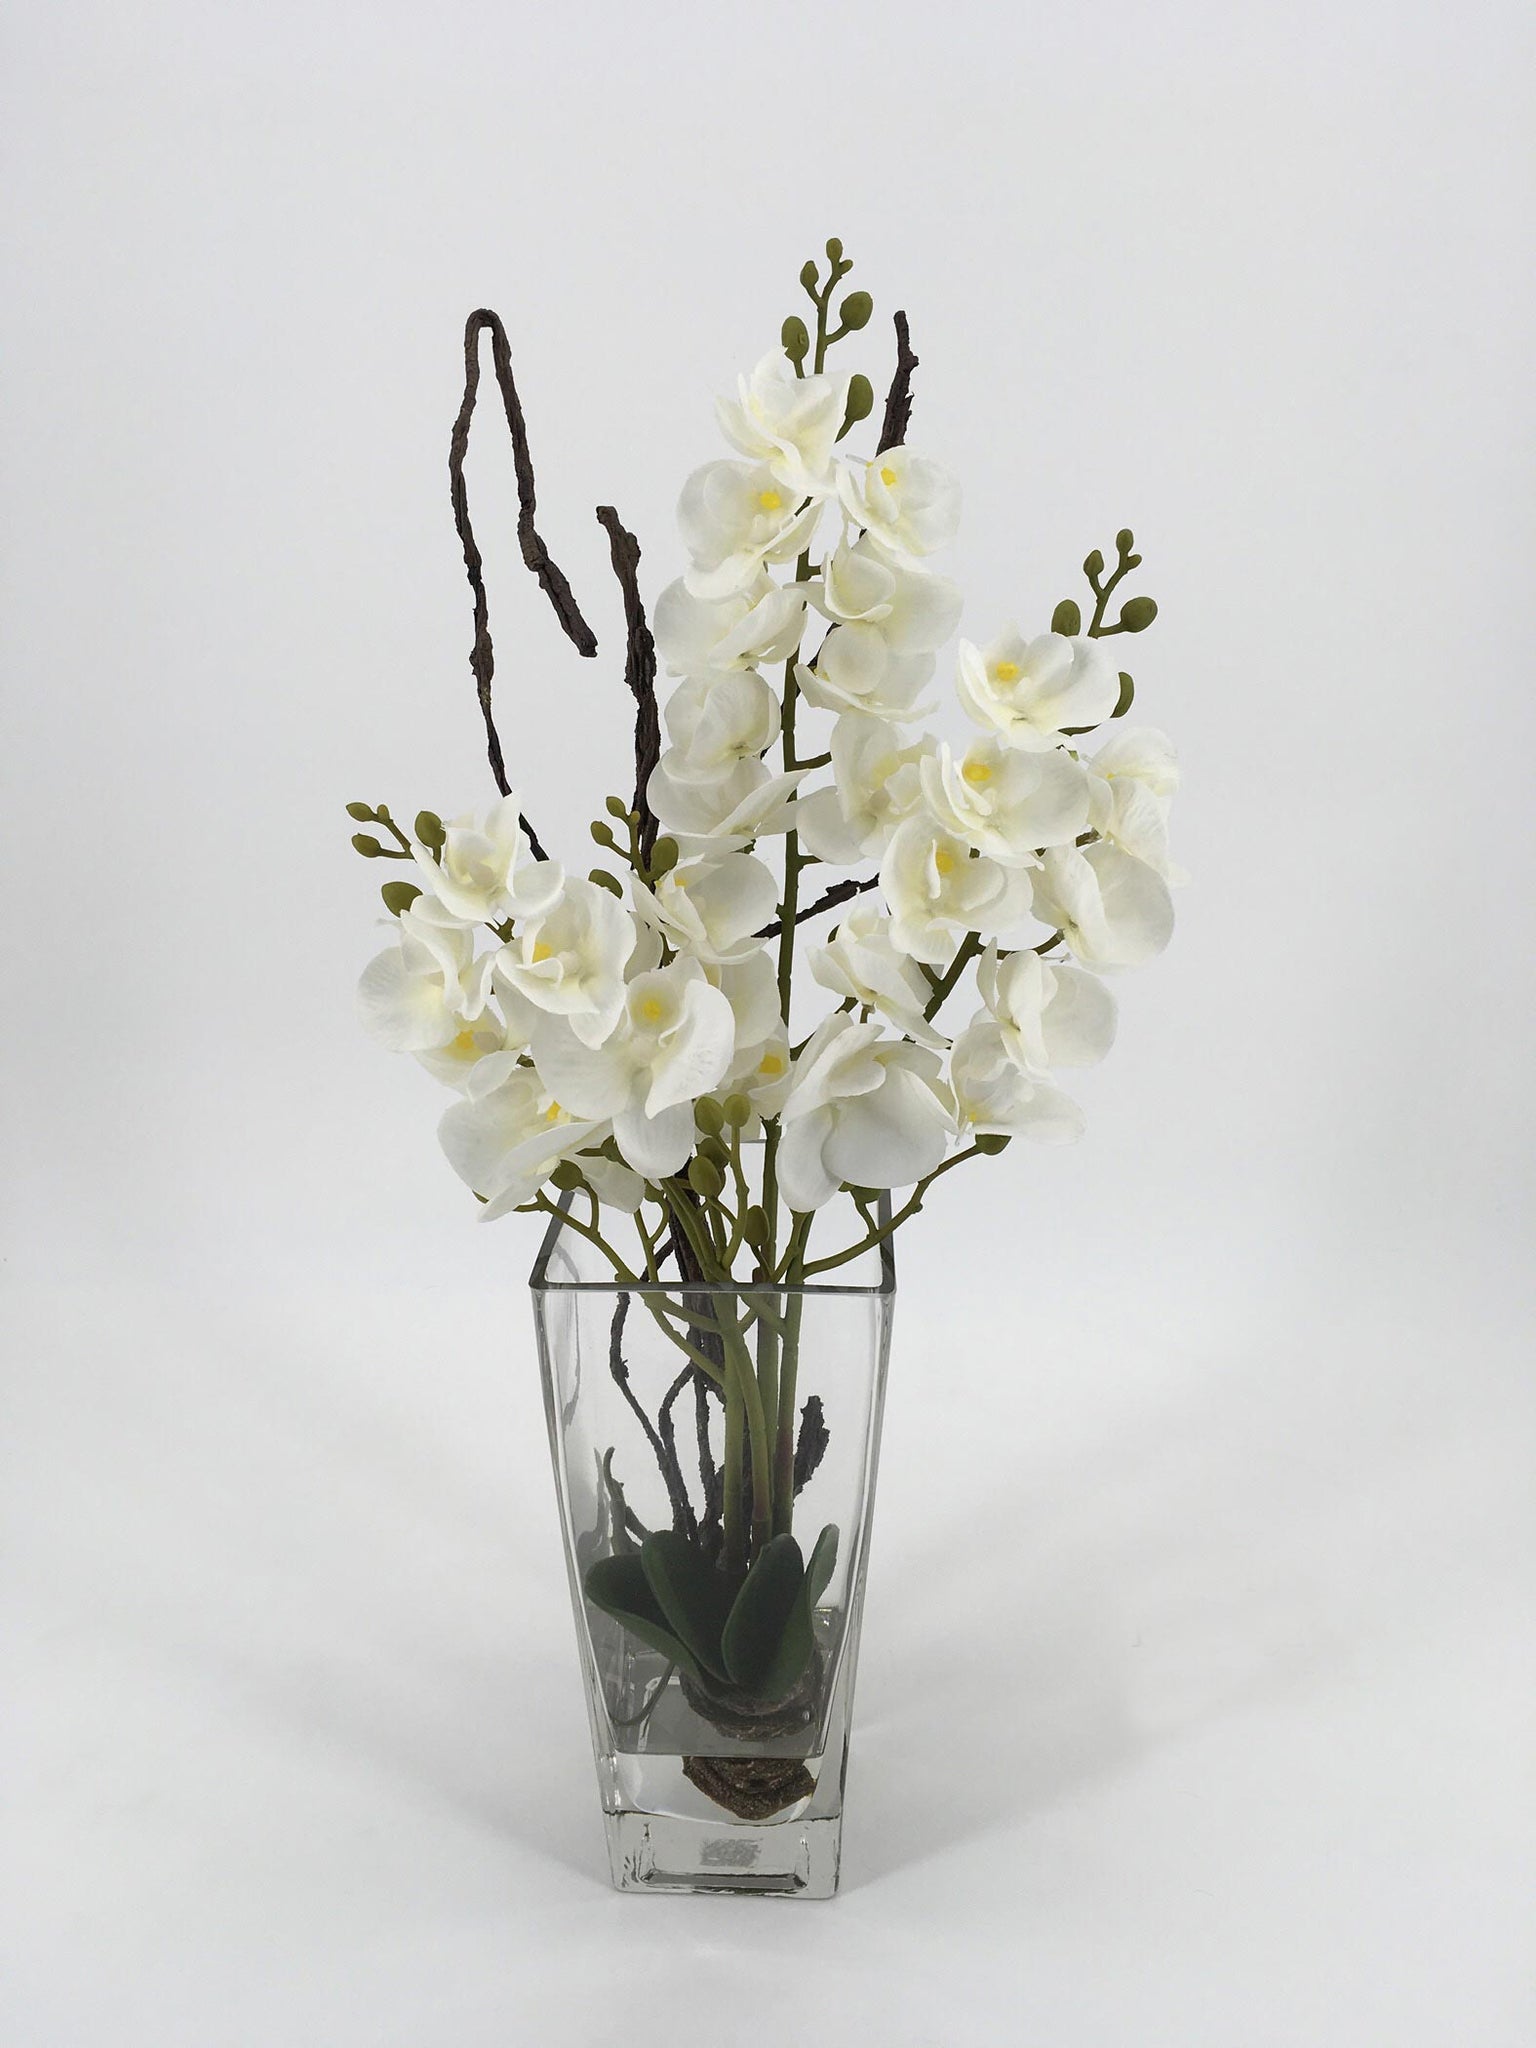 White Orchids in Glass Vase with Water